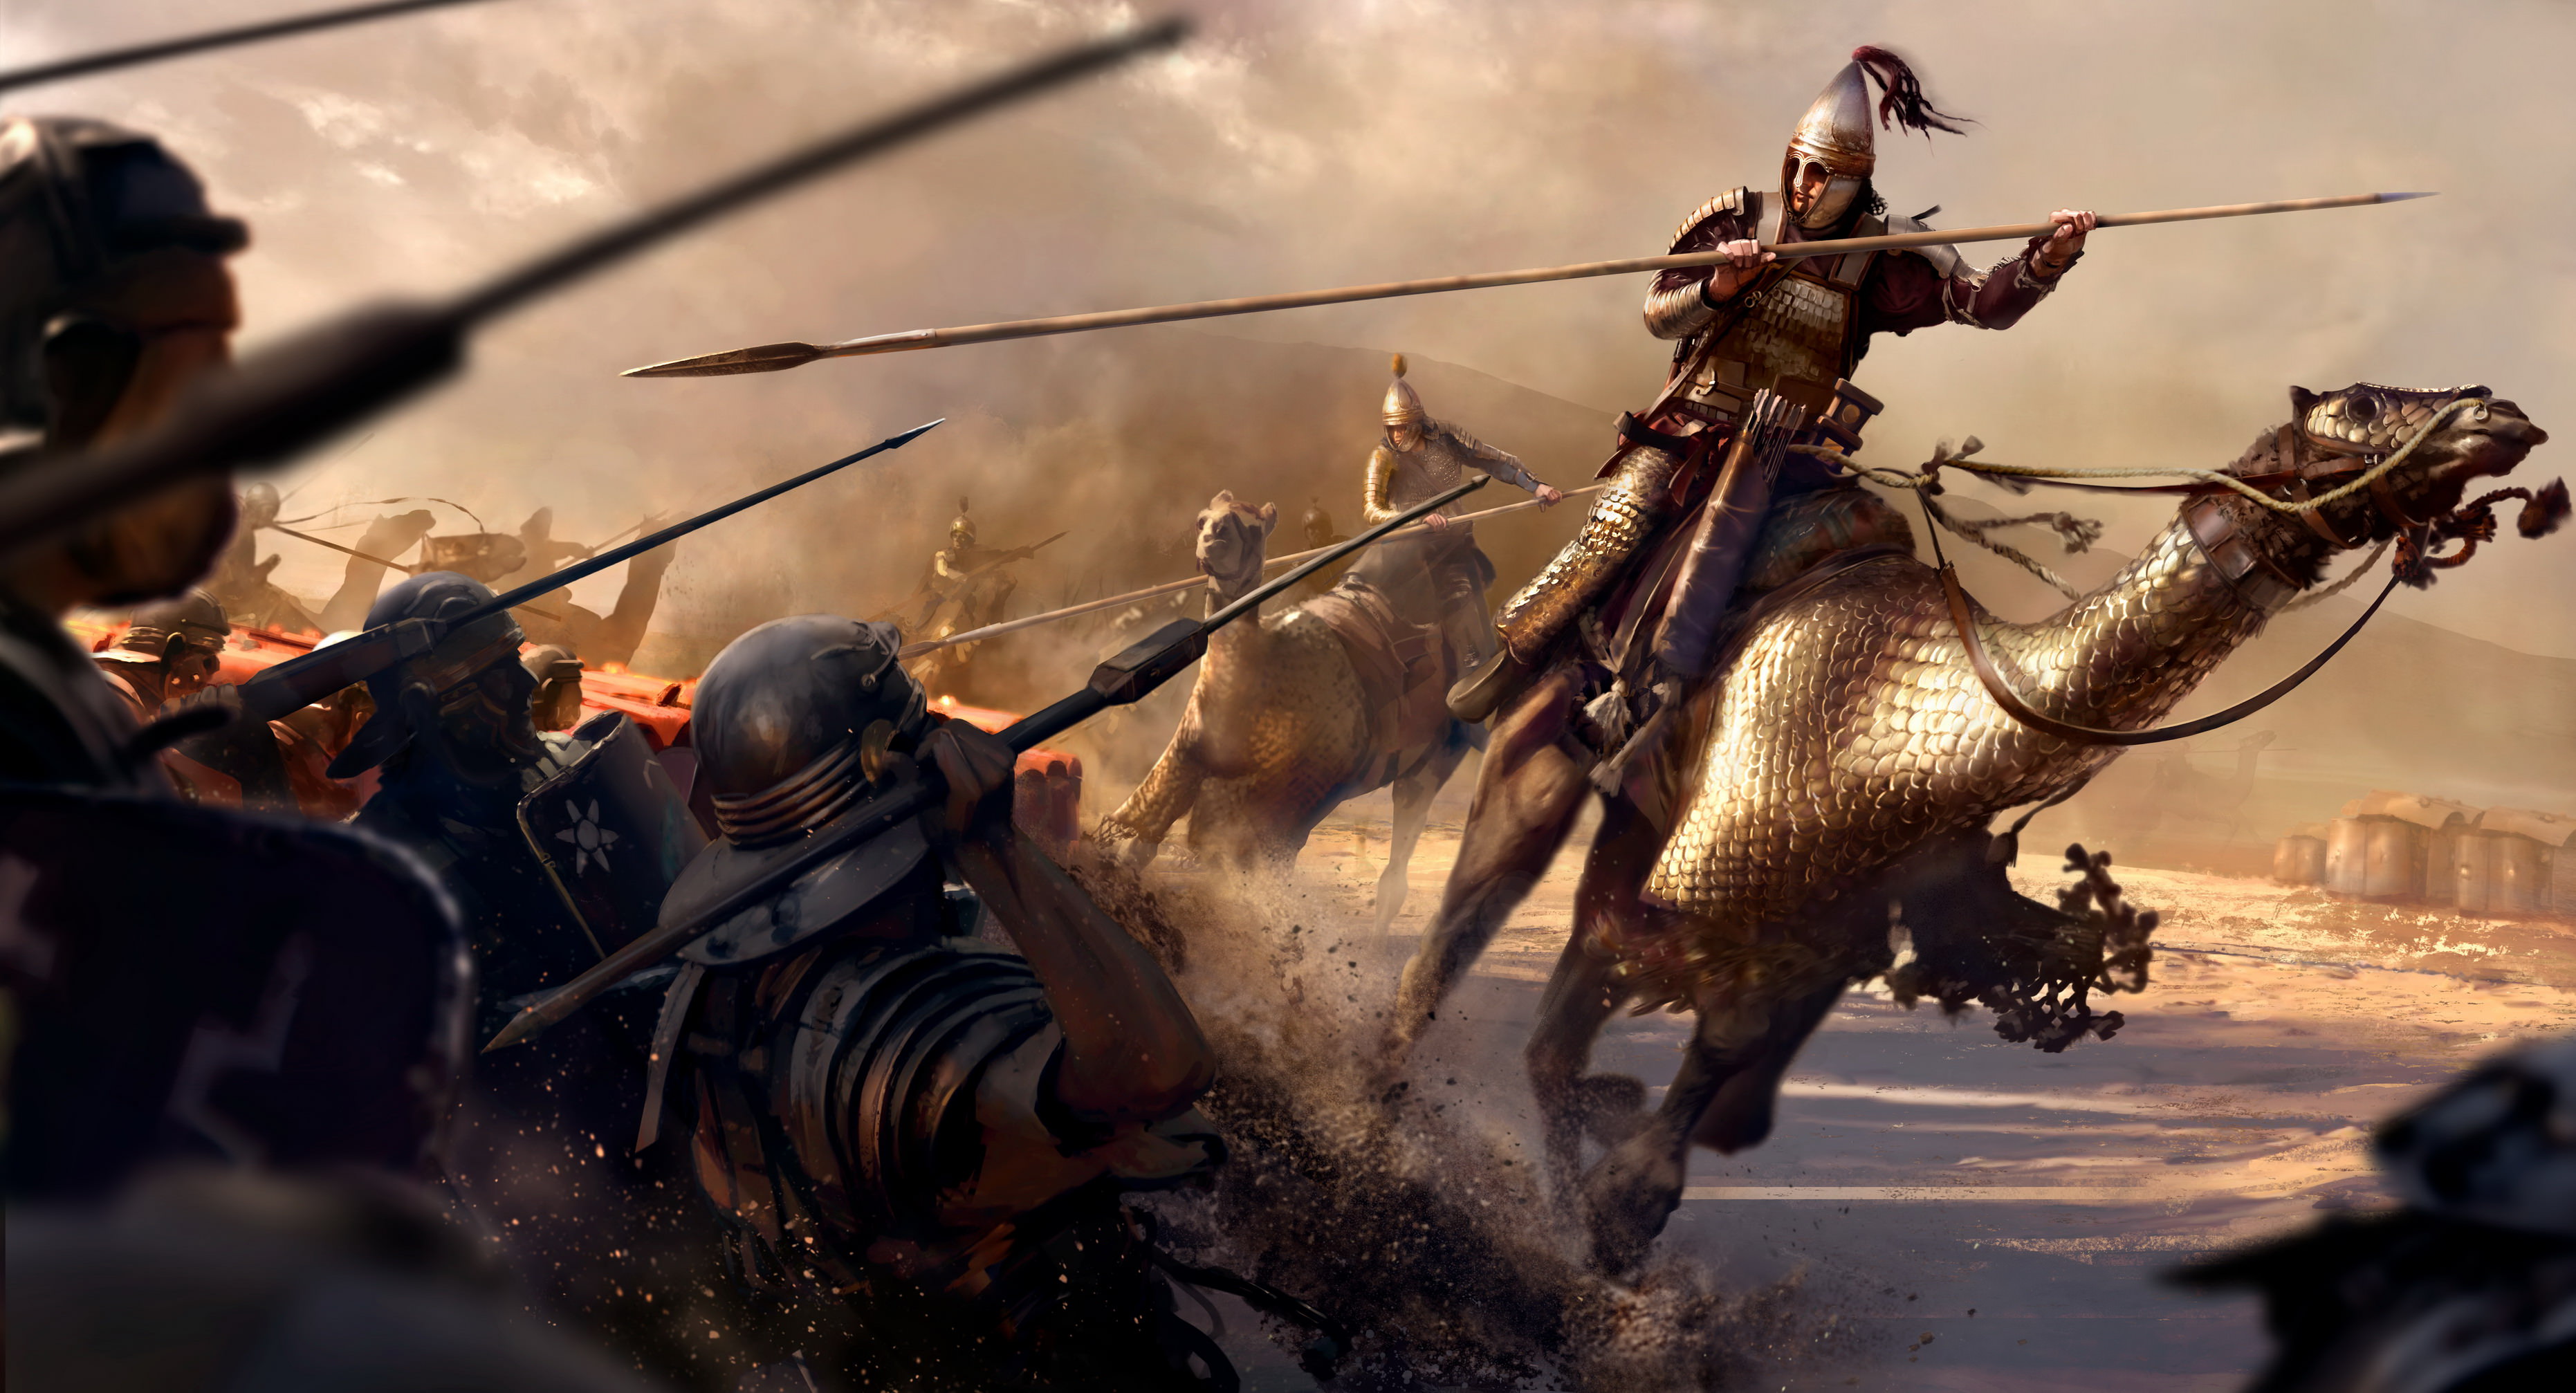 Carrhae 53 BC: Rome's Disaster in the Desert: Campaign Nic Fields